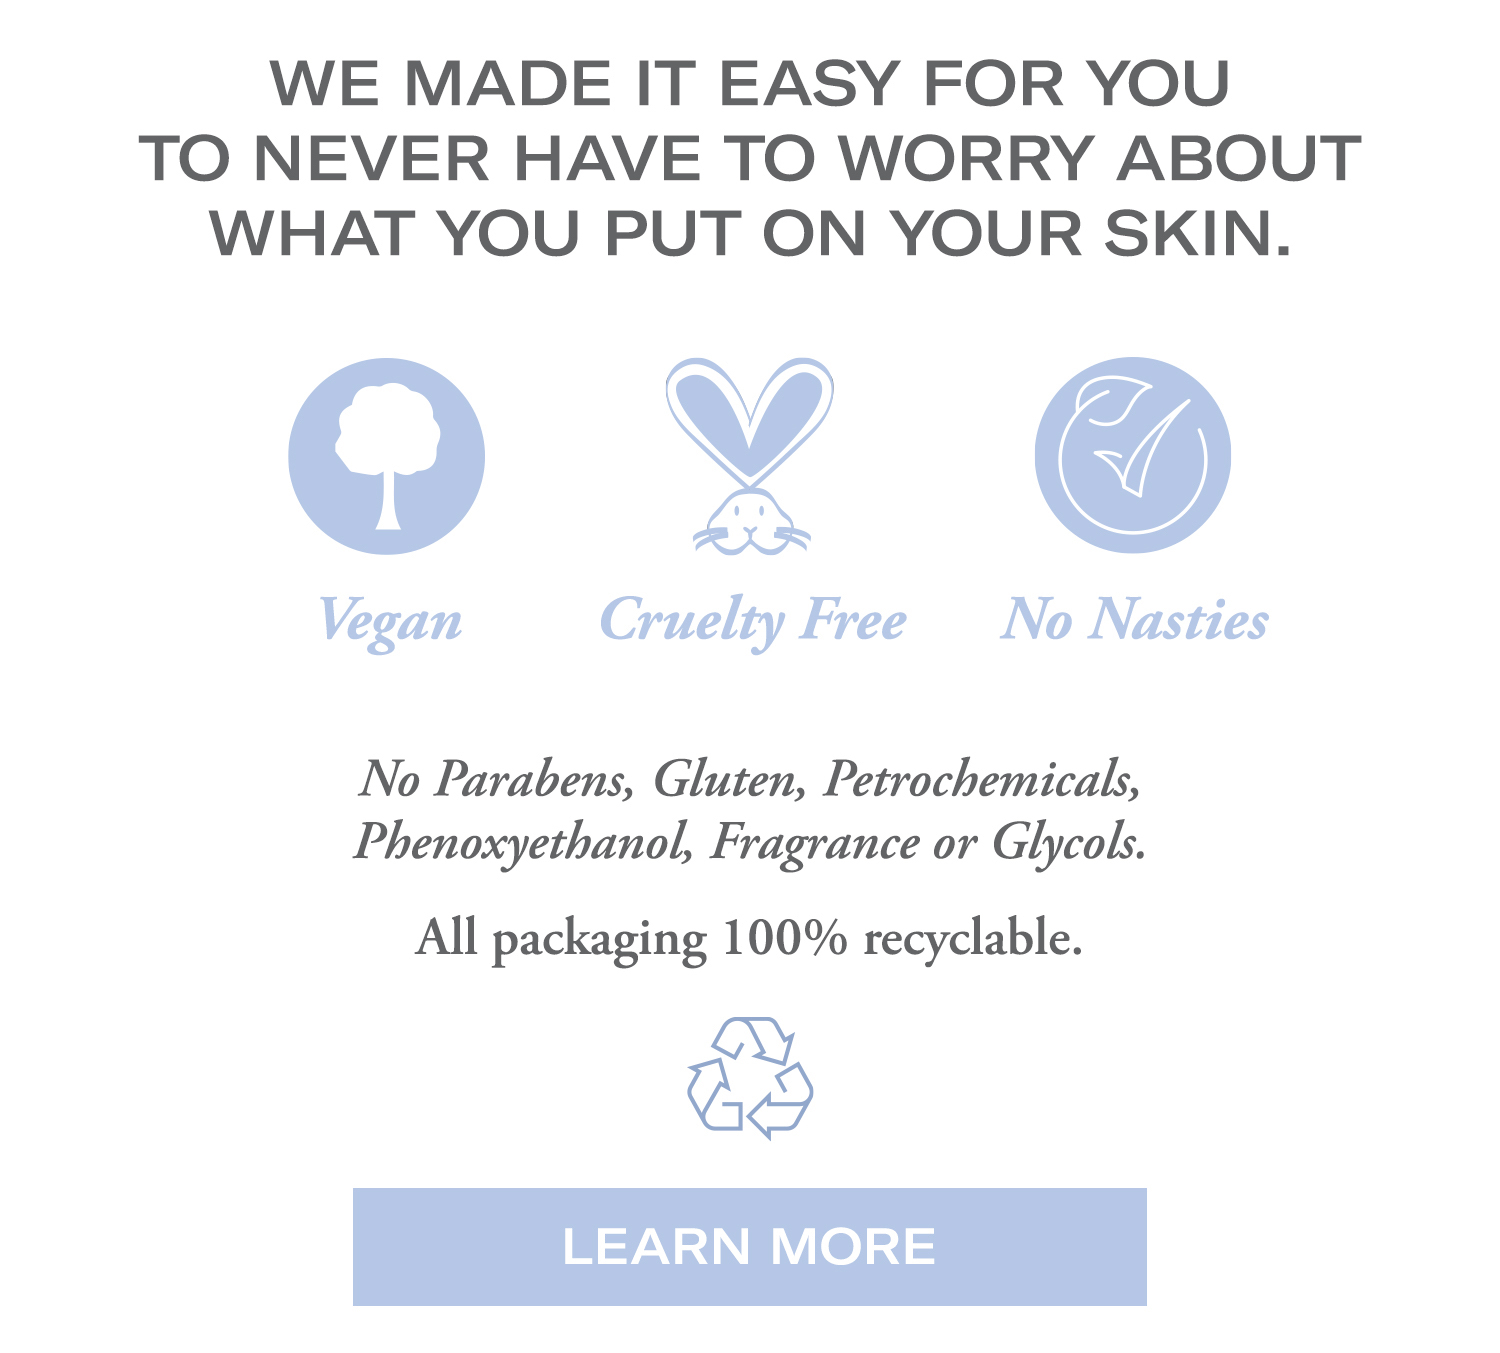 We made it easy for you to never have to worry about what you put on your skin.